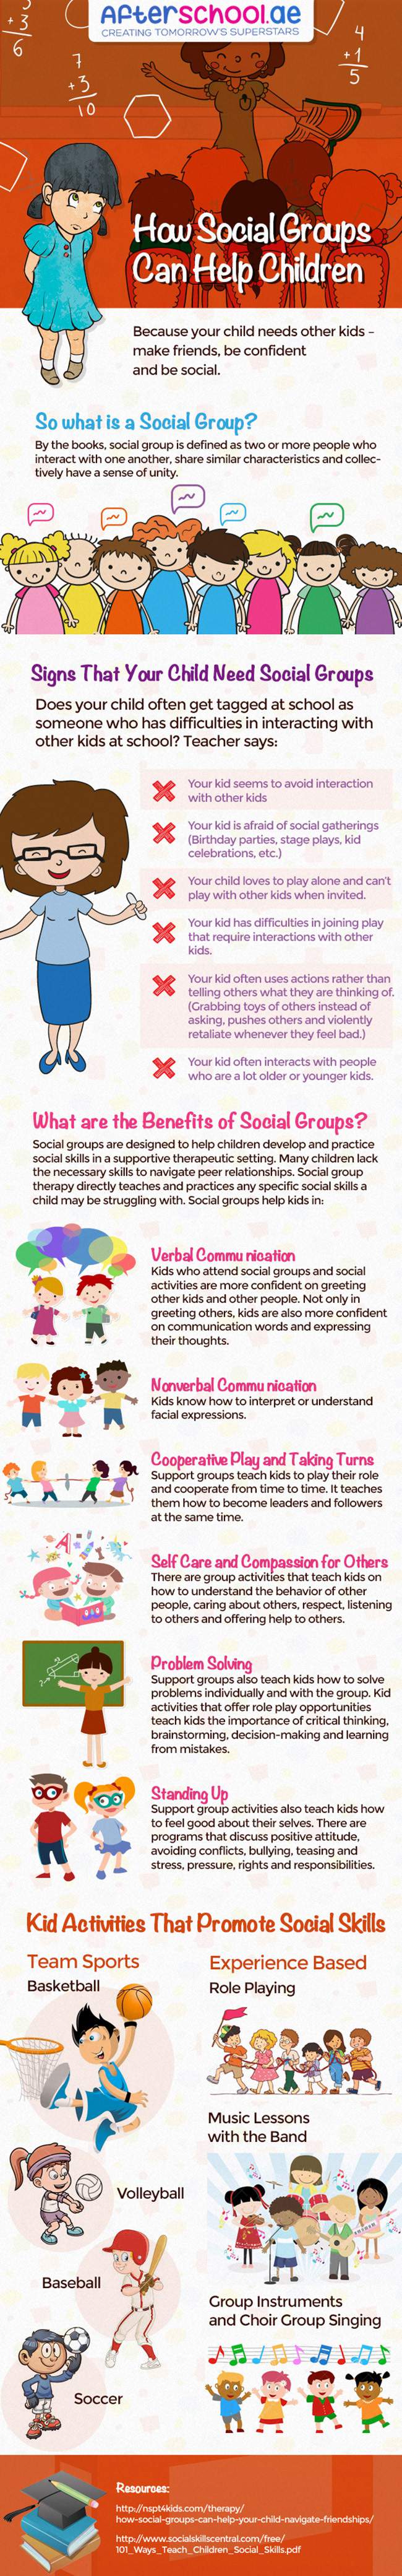 How Social Groups can Help Children